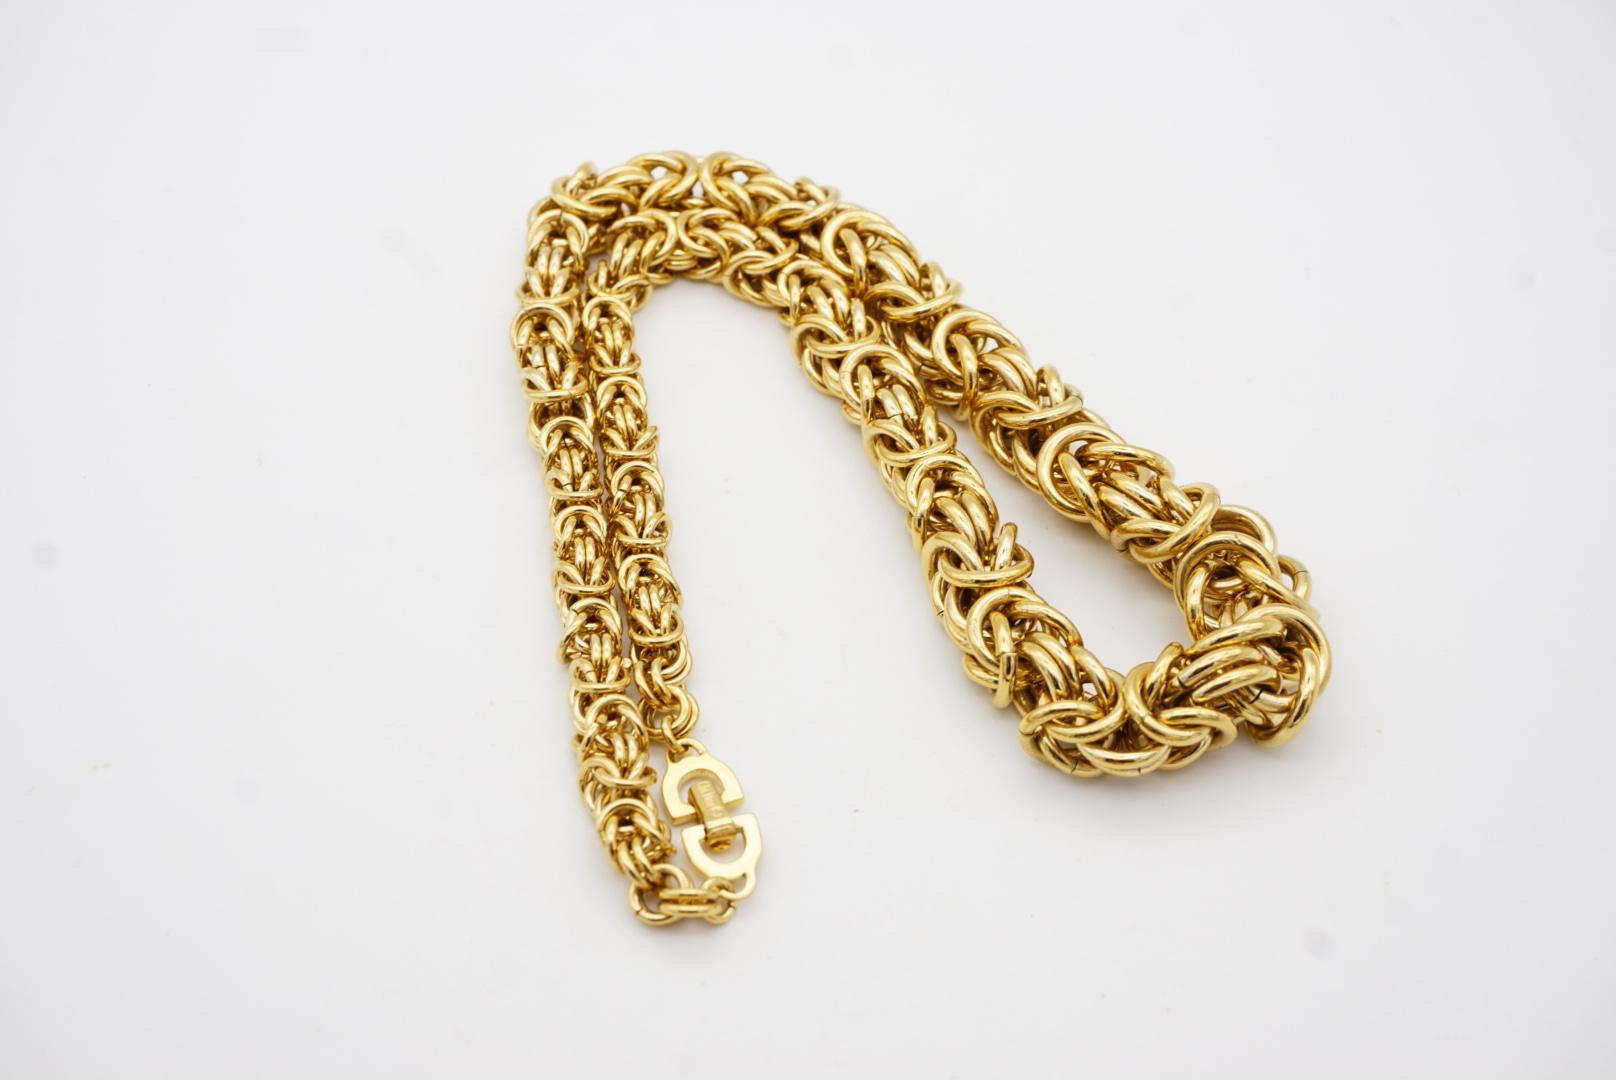 Christian Dior Vintage 1980s Byzantine Braid Royal Mesh Knot Link Rope Necklace For Sale 7